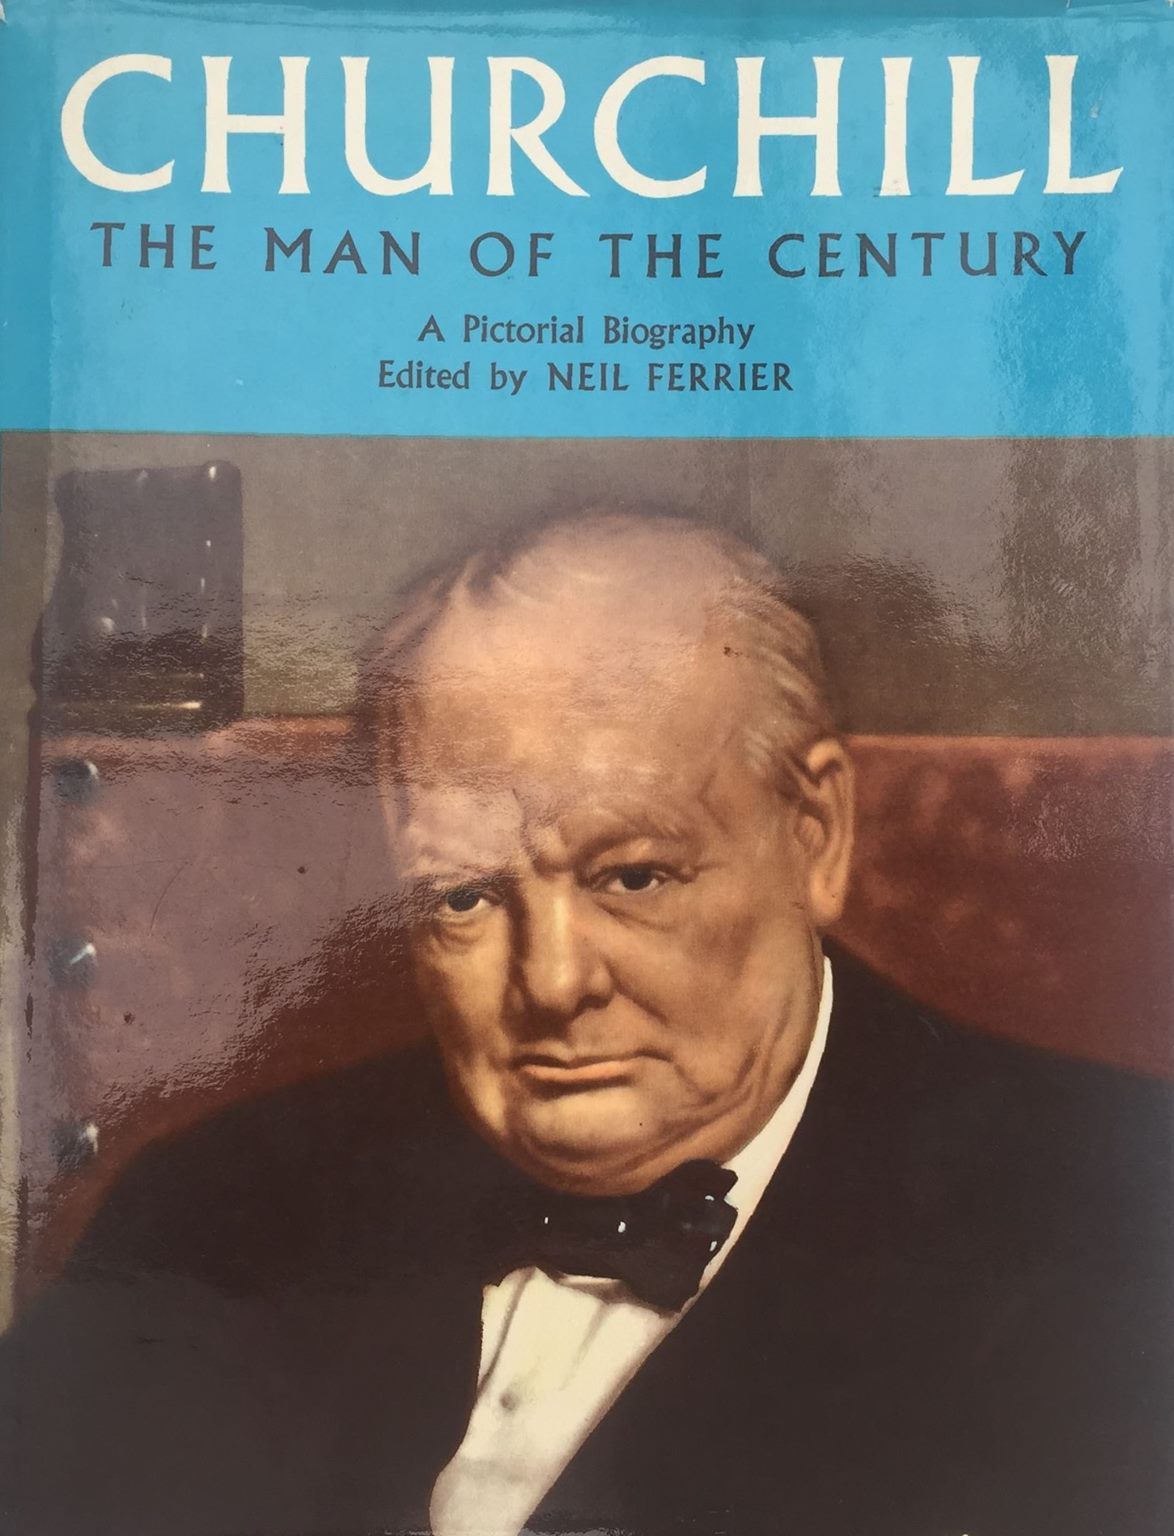 CHURCHILL: The Man of The Century - A Pictorial Biography